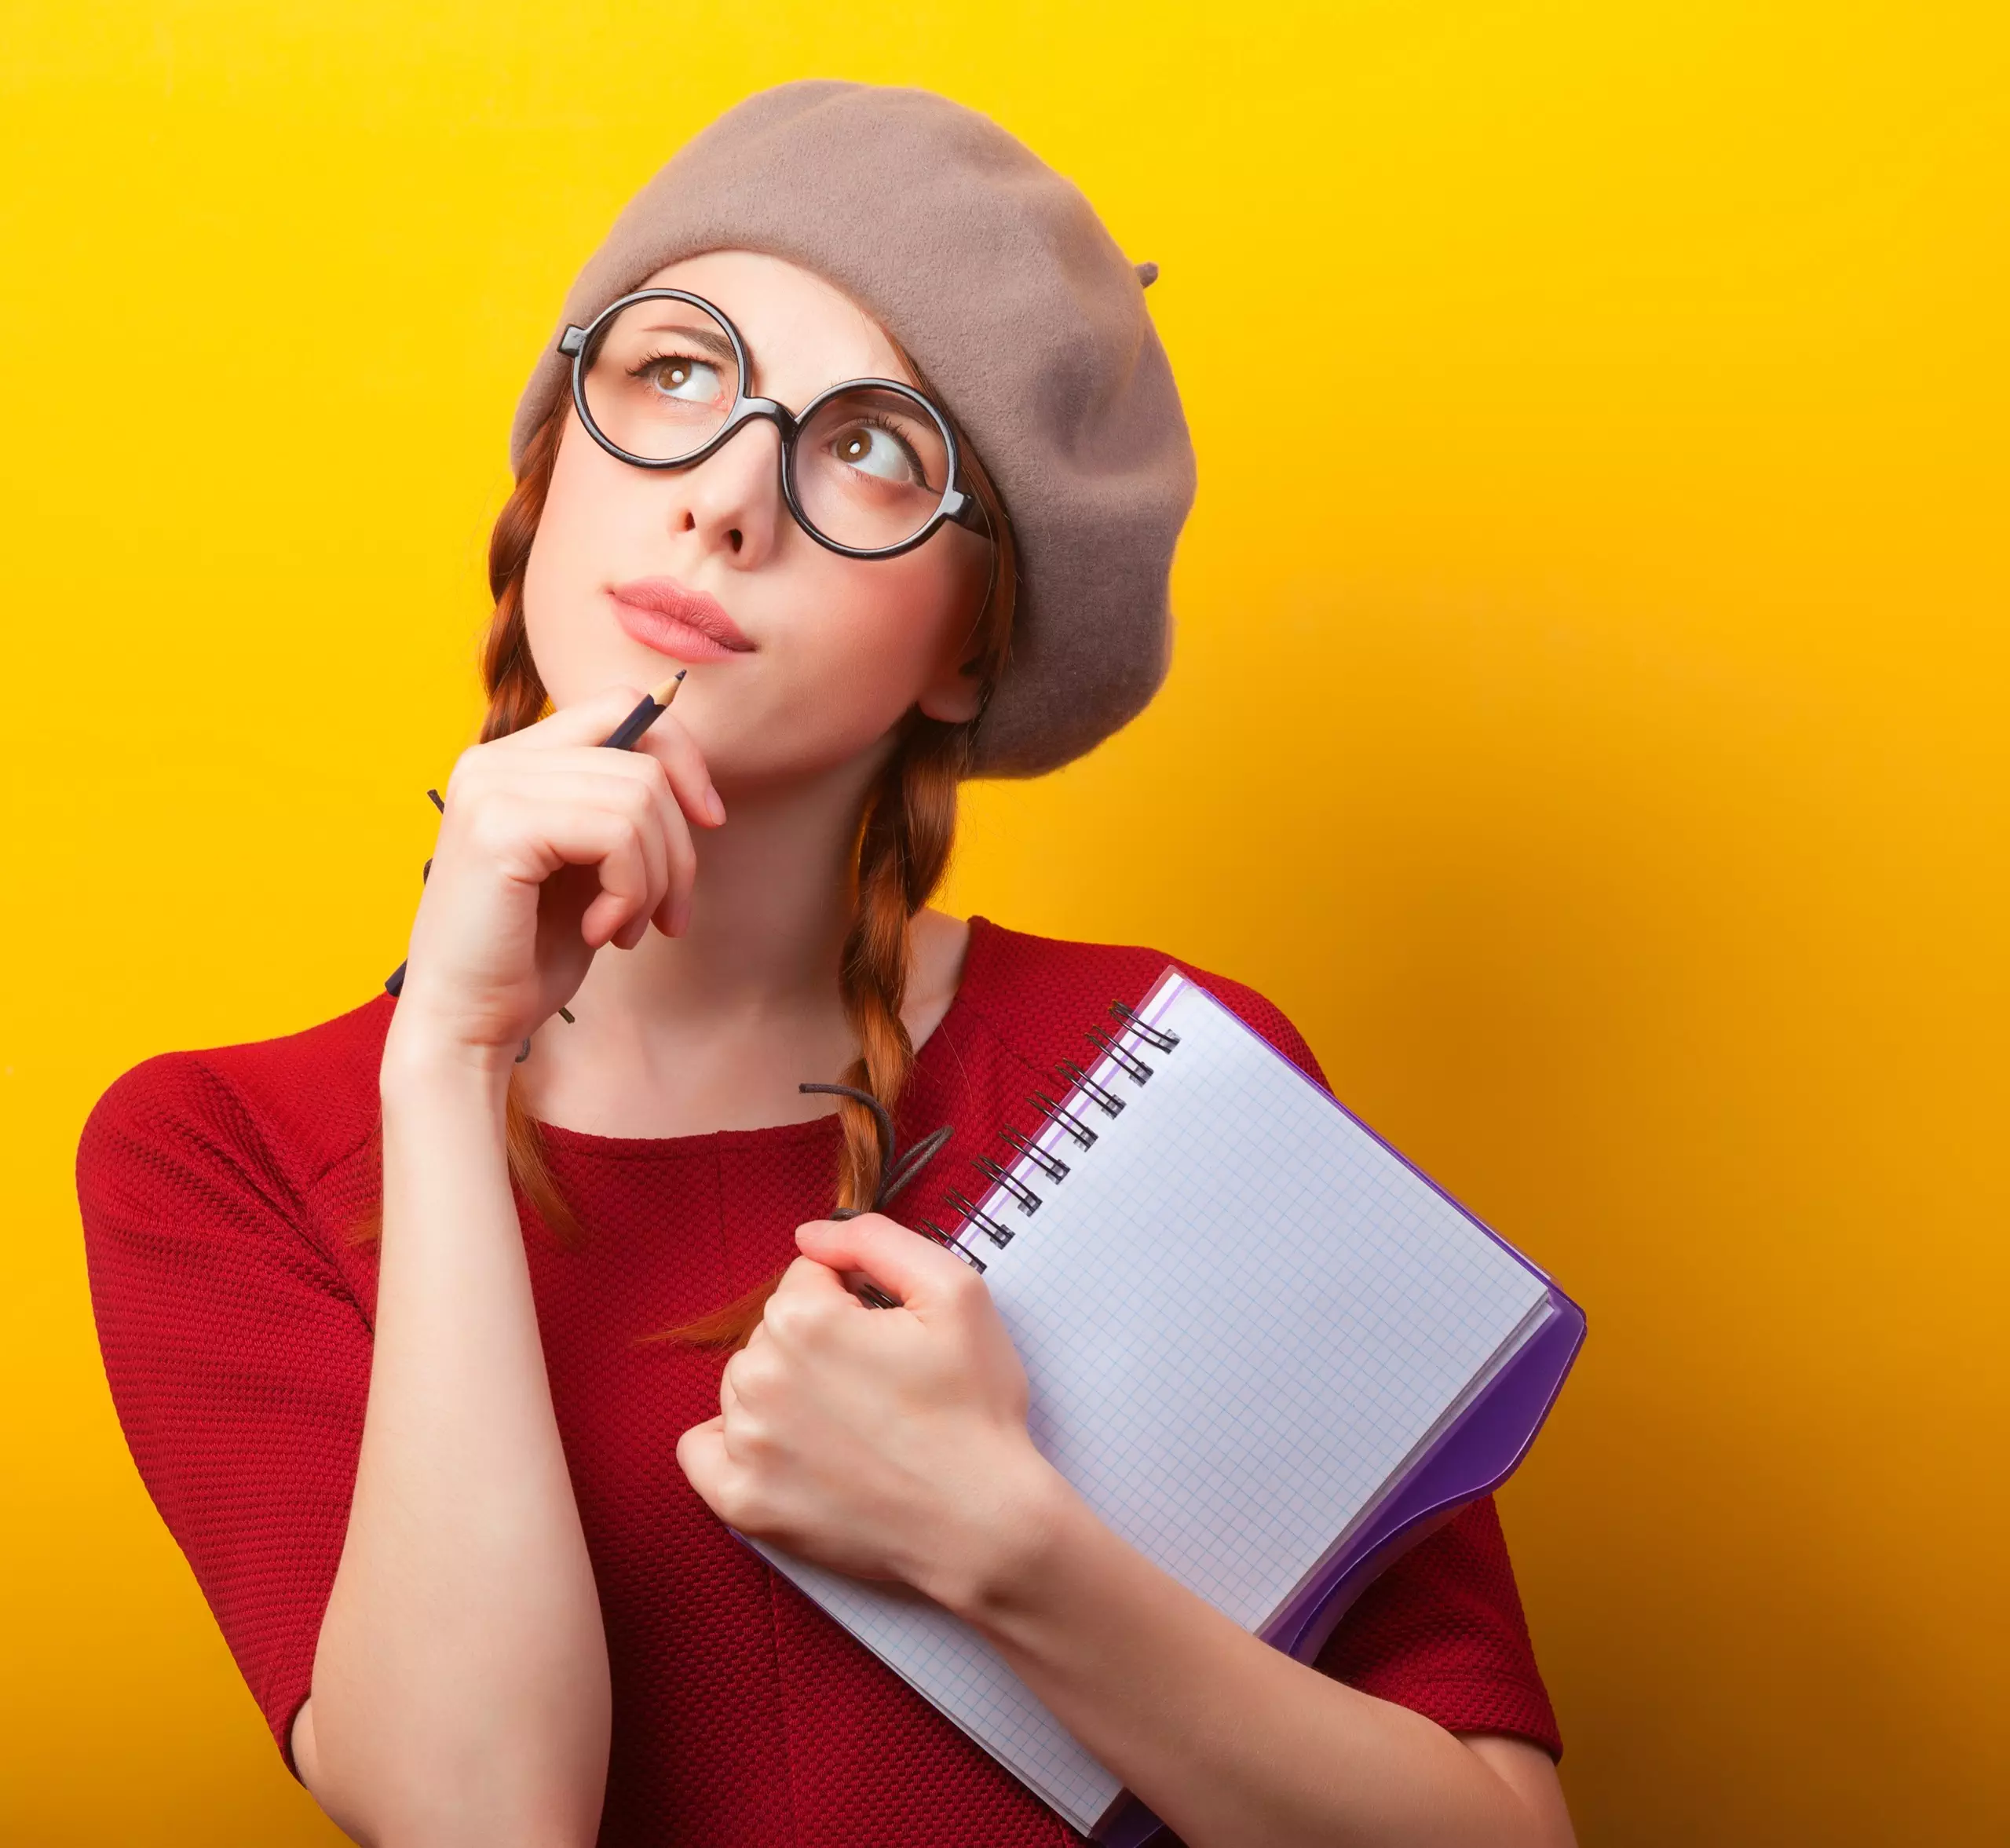 Woman thinking with notebook against yellow background.